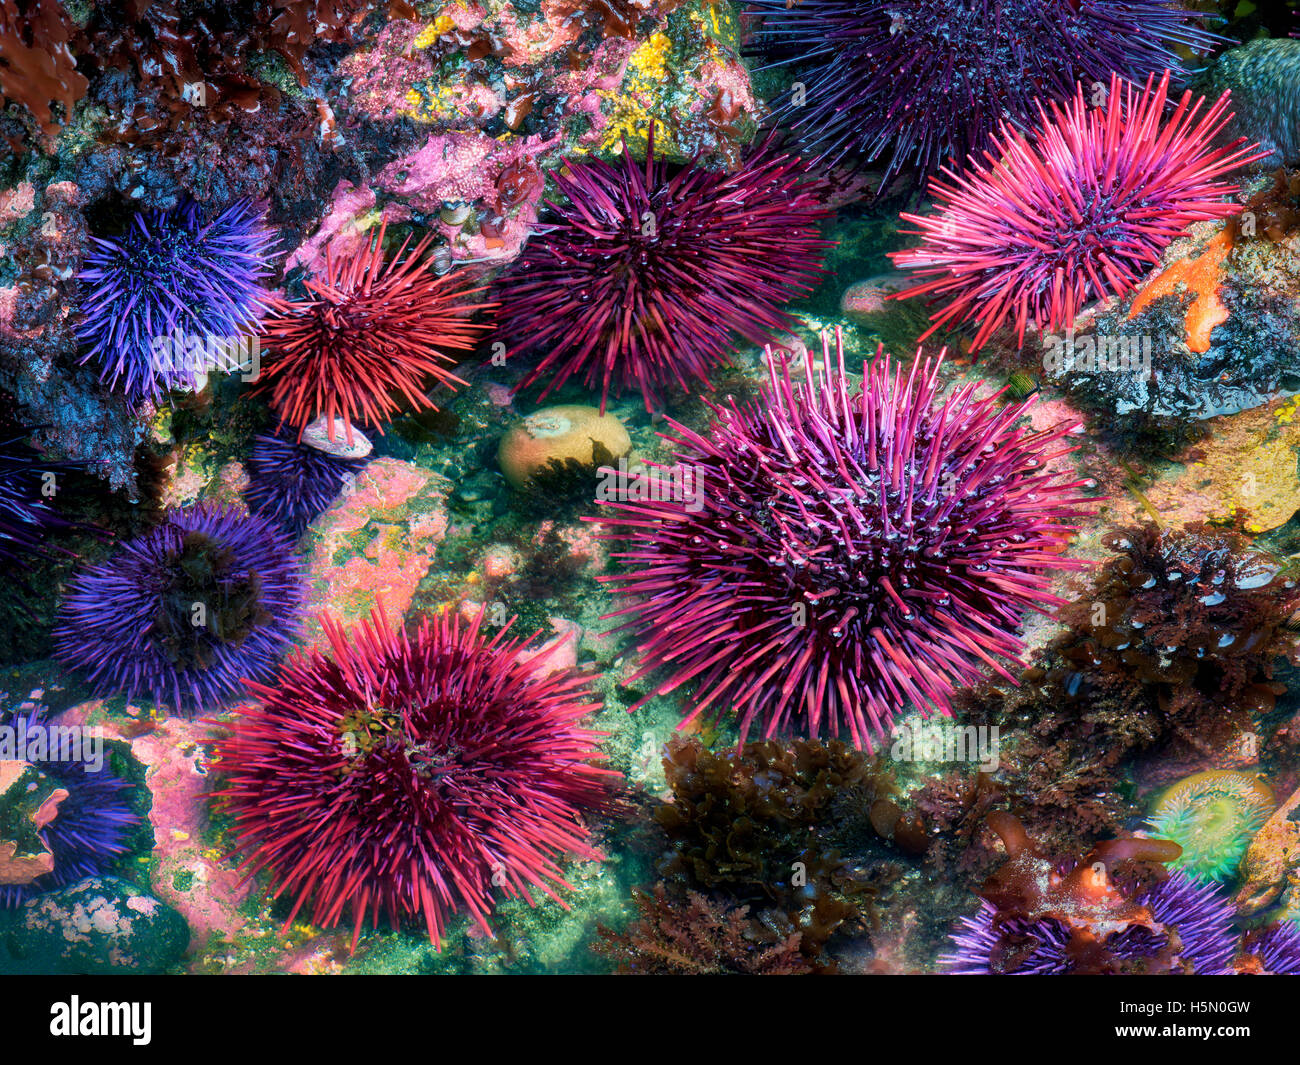 Red and purple sea urchins at extreme minus tide. Yaquina Head Outstanding Natural Area, Oregon Stock Photo